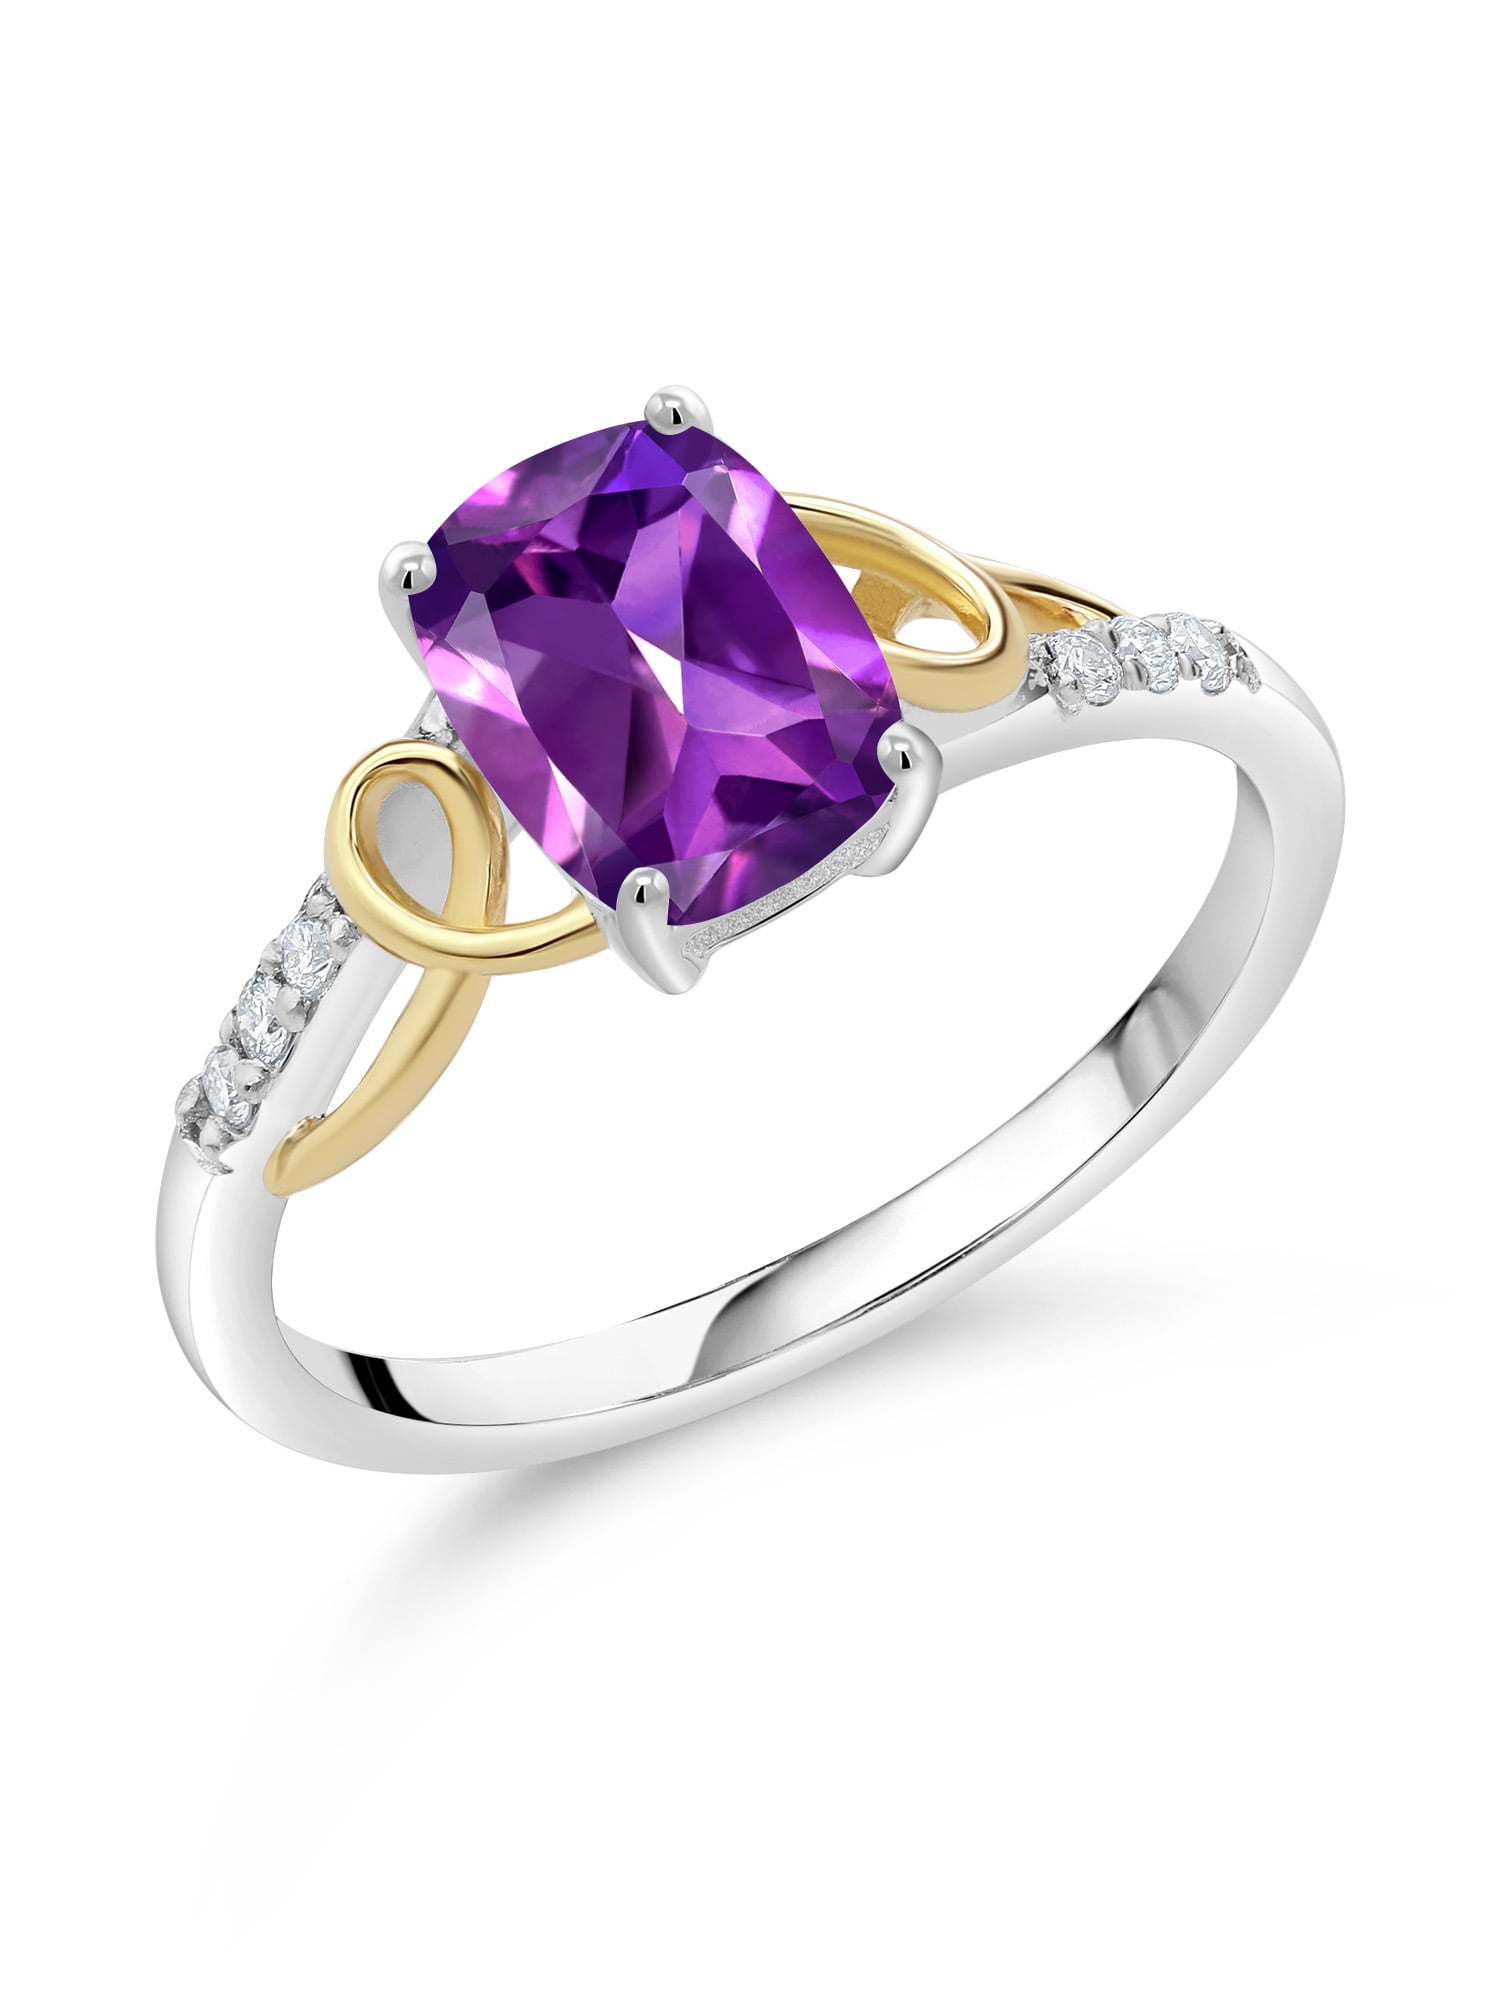 Gem Stone King 2 Tone 10K Yellow Gold and 925 Sterling Silver Purple  Amethyst and White G/H Lab Grown Diamond Women Ring (1.26 Ct Cushion,  Available